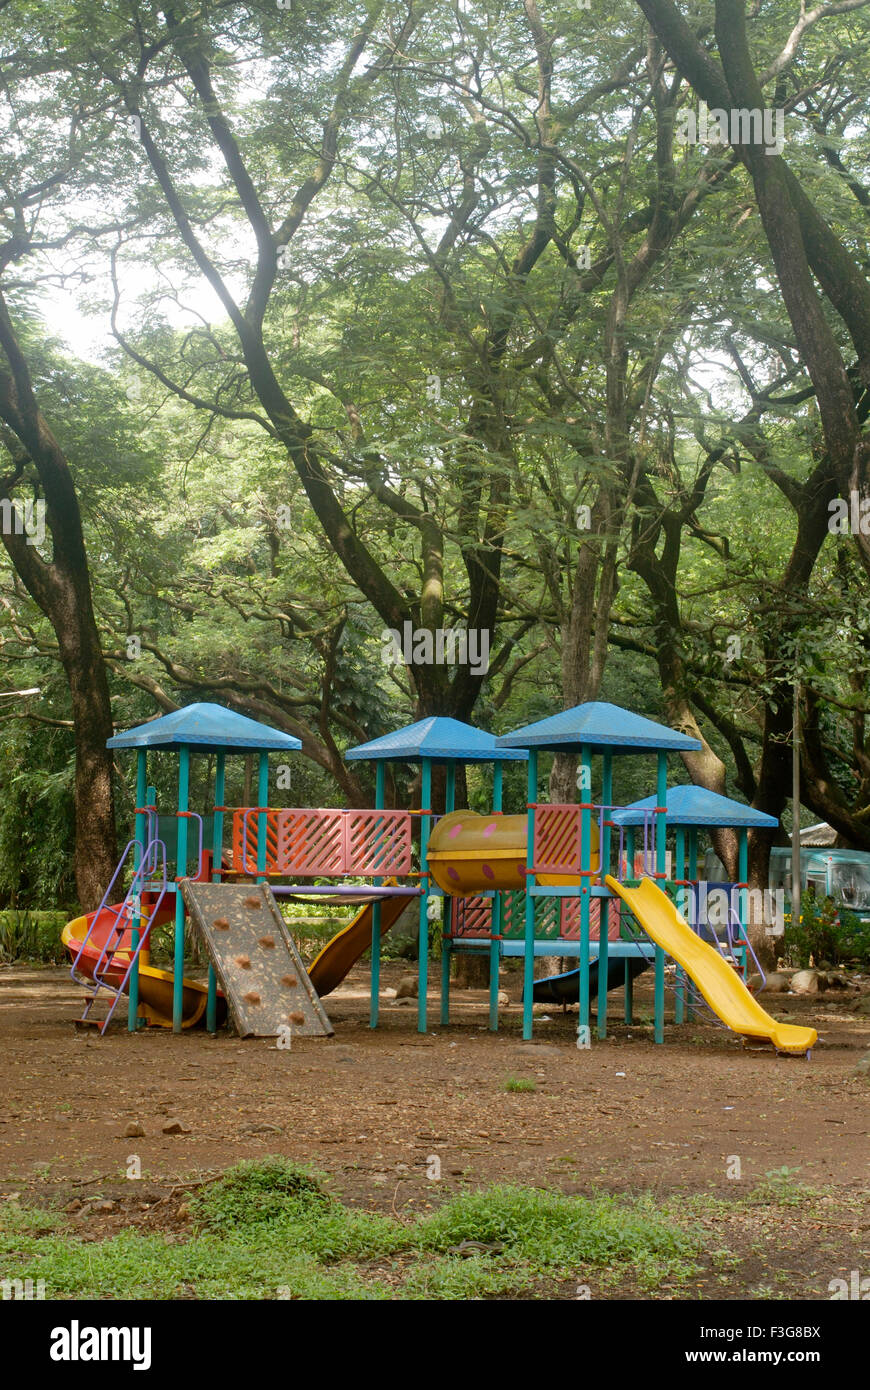 Various types colourful slides play tool children fitted dense forest Sanjay Gandhi National Park Borivali Mumbai Stock Photo